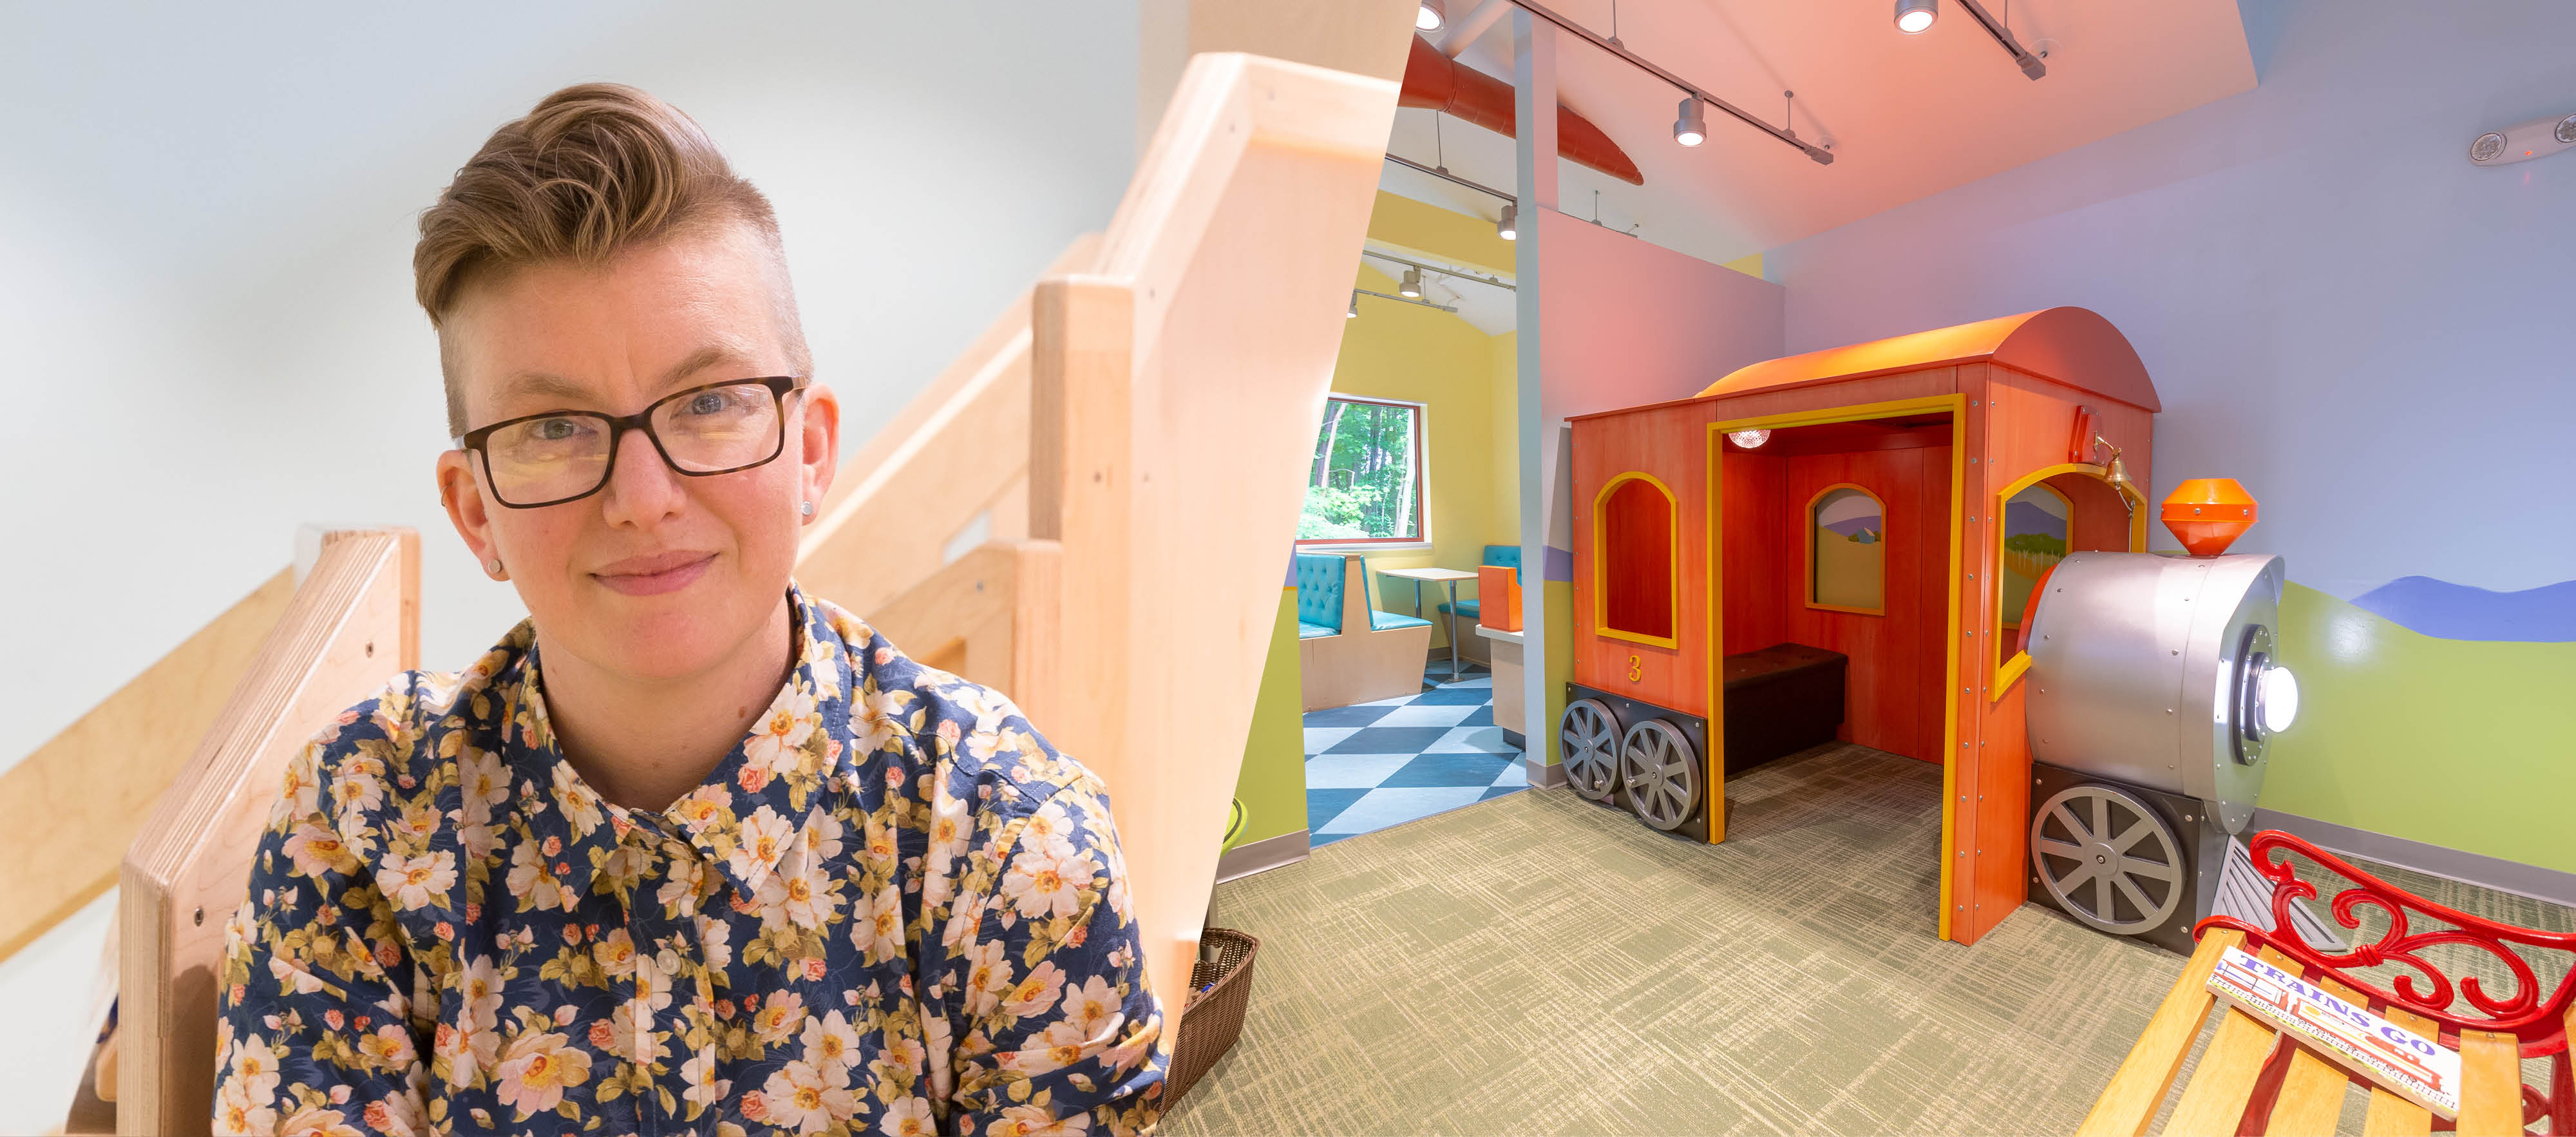 Margaret Middleton wears a floral collared shirt, glasses, and has short hair. On the right is an orange train engine in a colorful playroom.